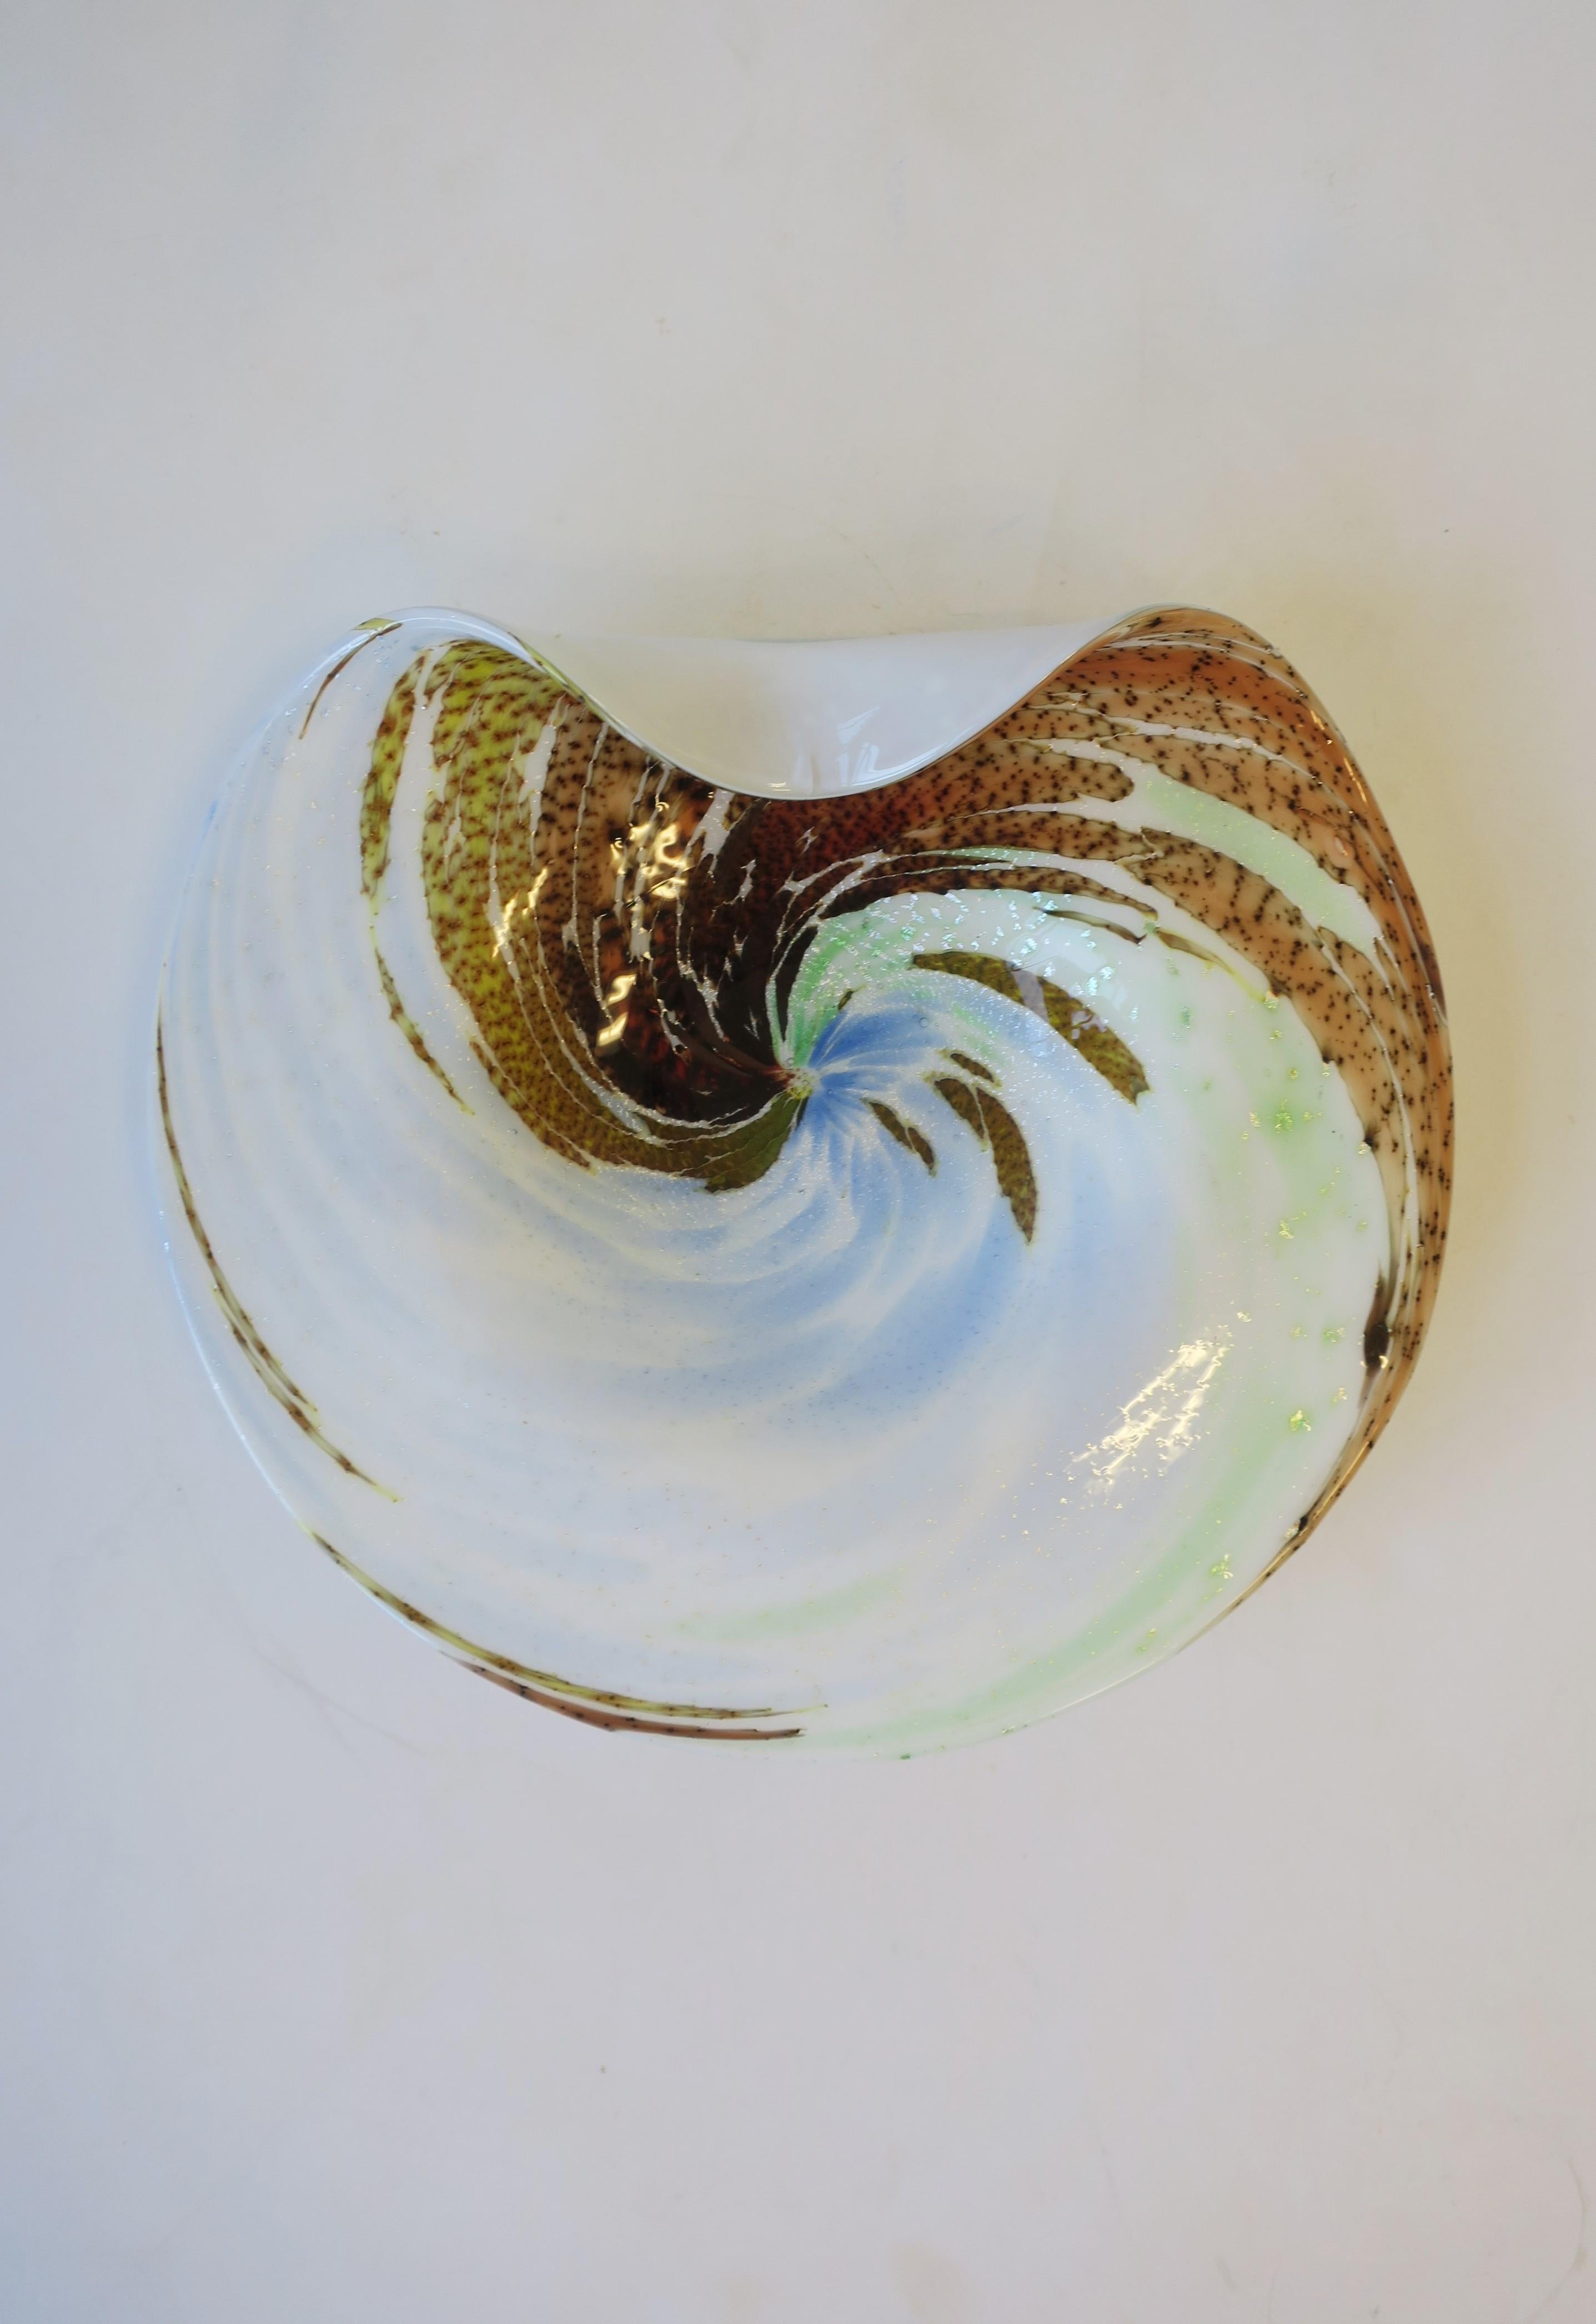 A Modern Italian Murano art glass bowl with an organic wave-like design, circa mid-20th century, Italy. Bowl is predominantly white with light blue, light green, yellow, red burgundy, and light orange art glass, and a sprinkling of silver flecks,